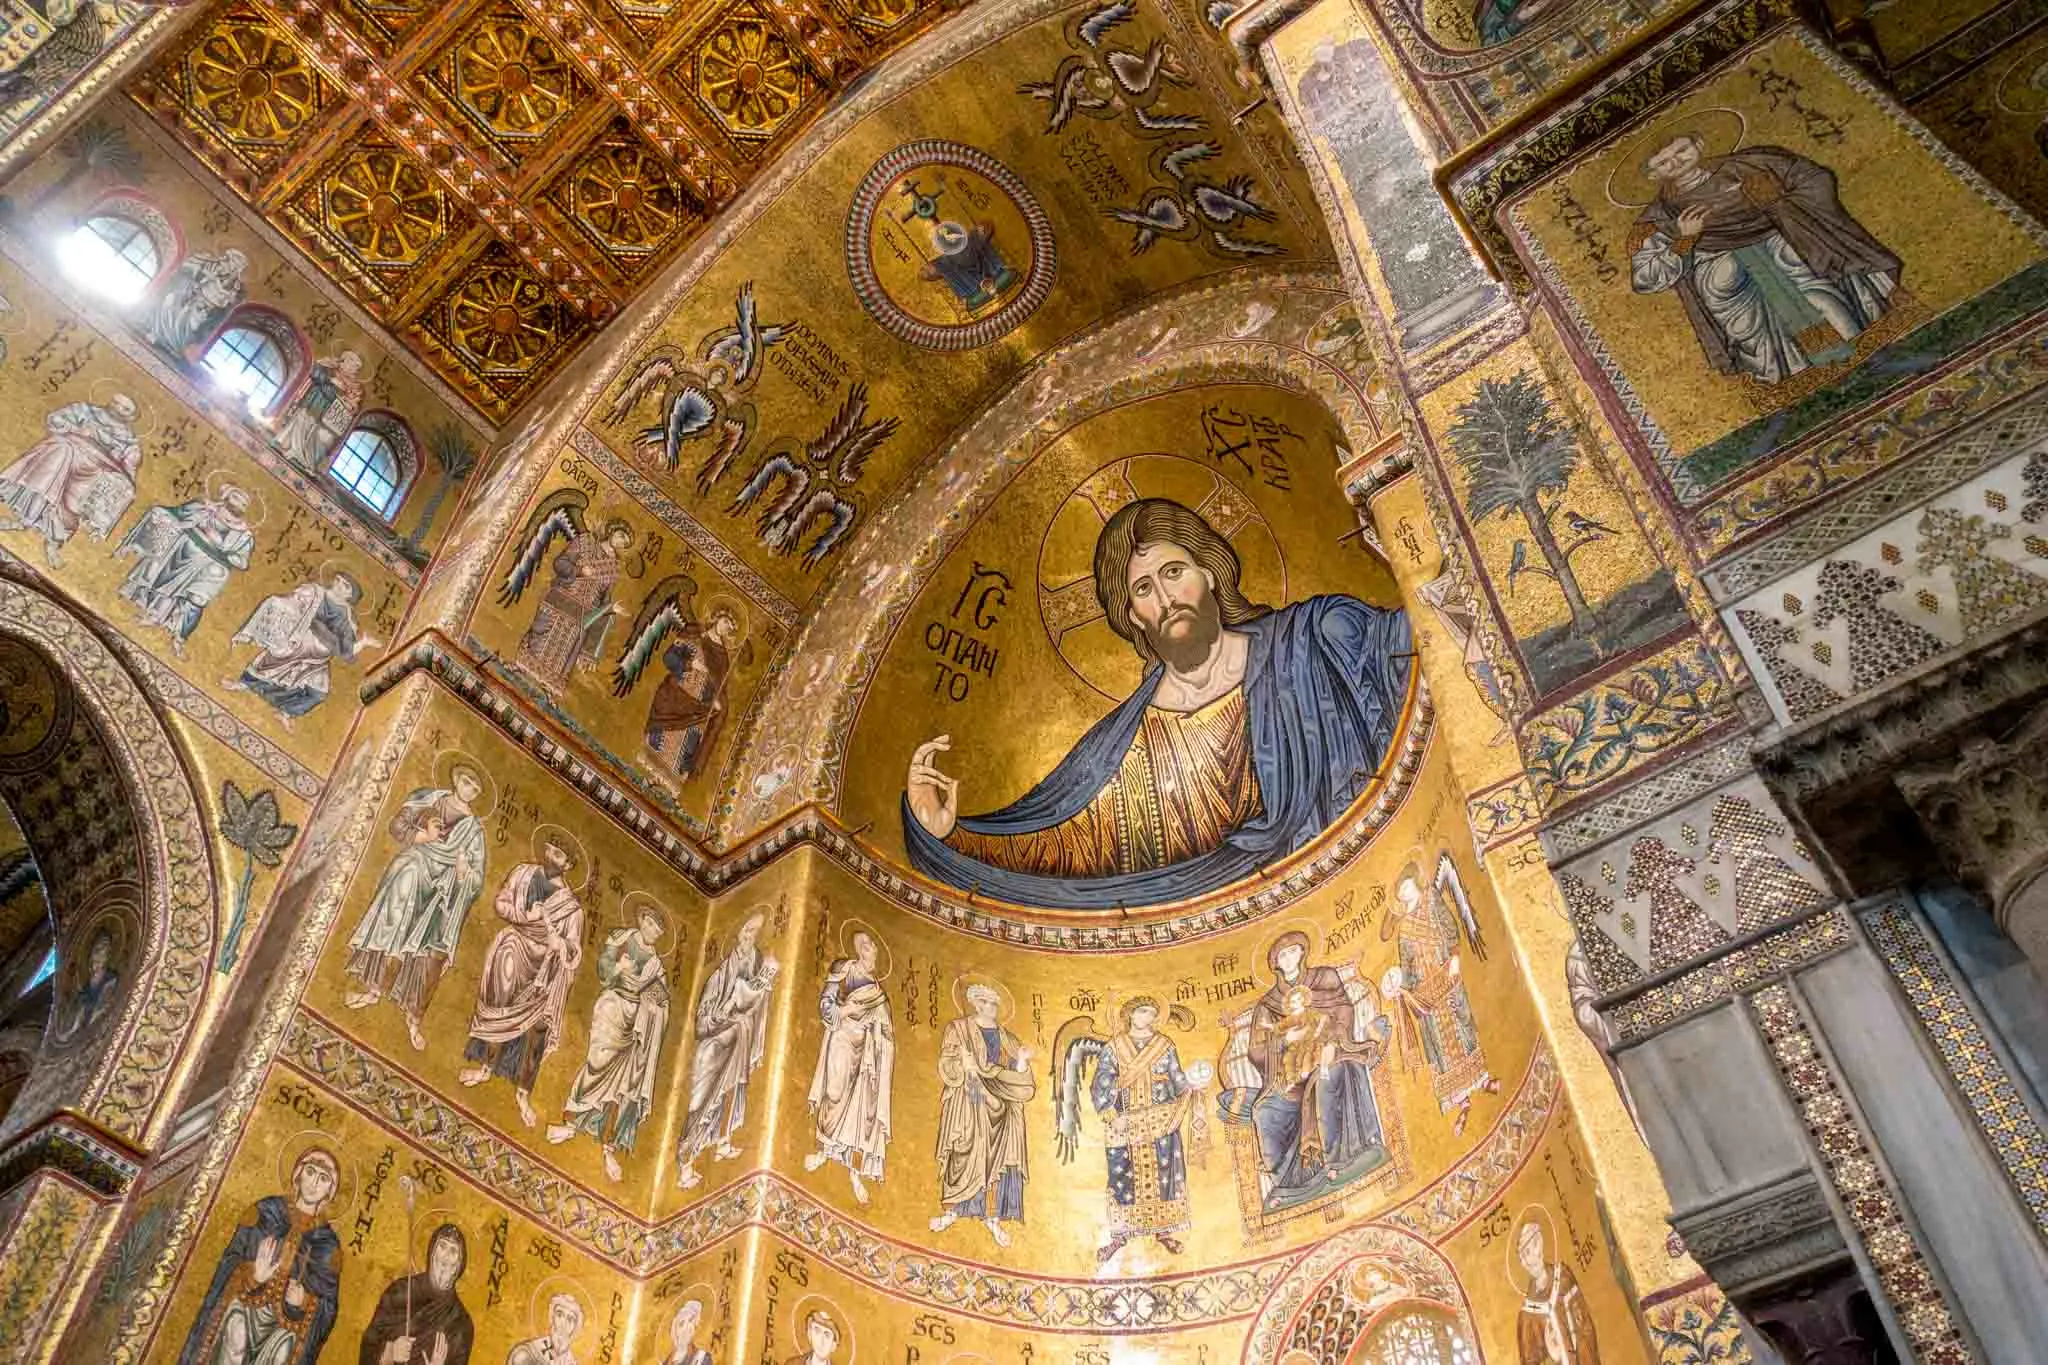 Massive mosaic inside a cathedral showing Jesus and other figures